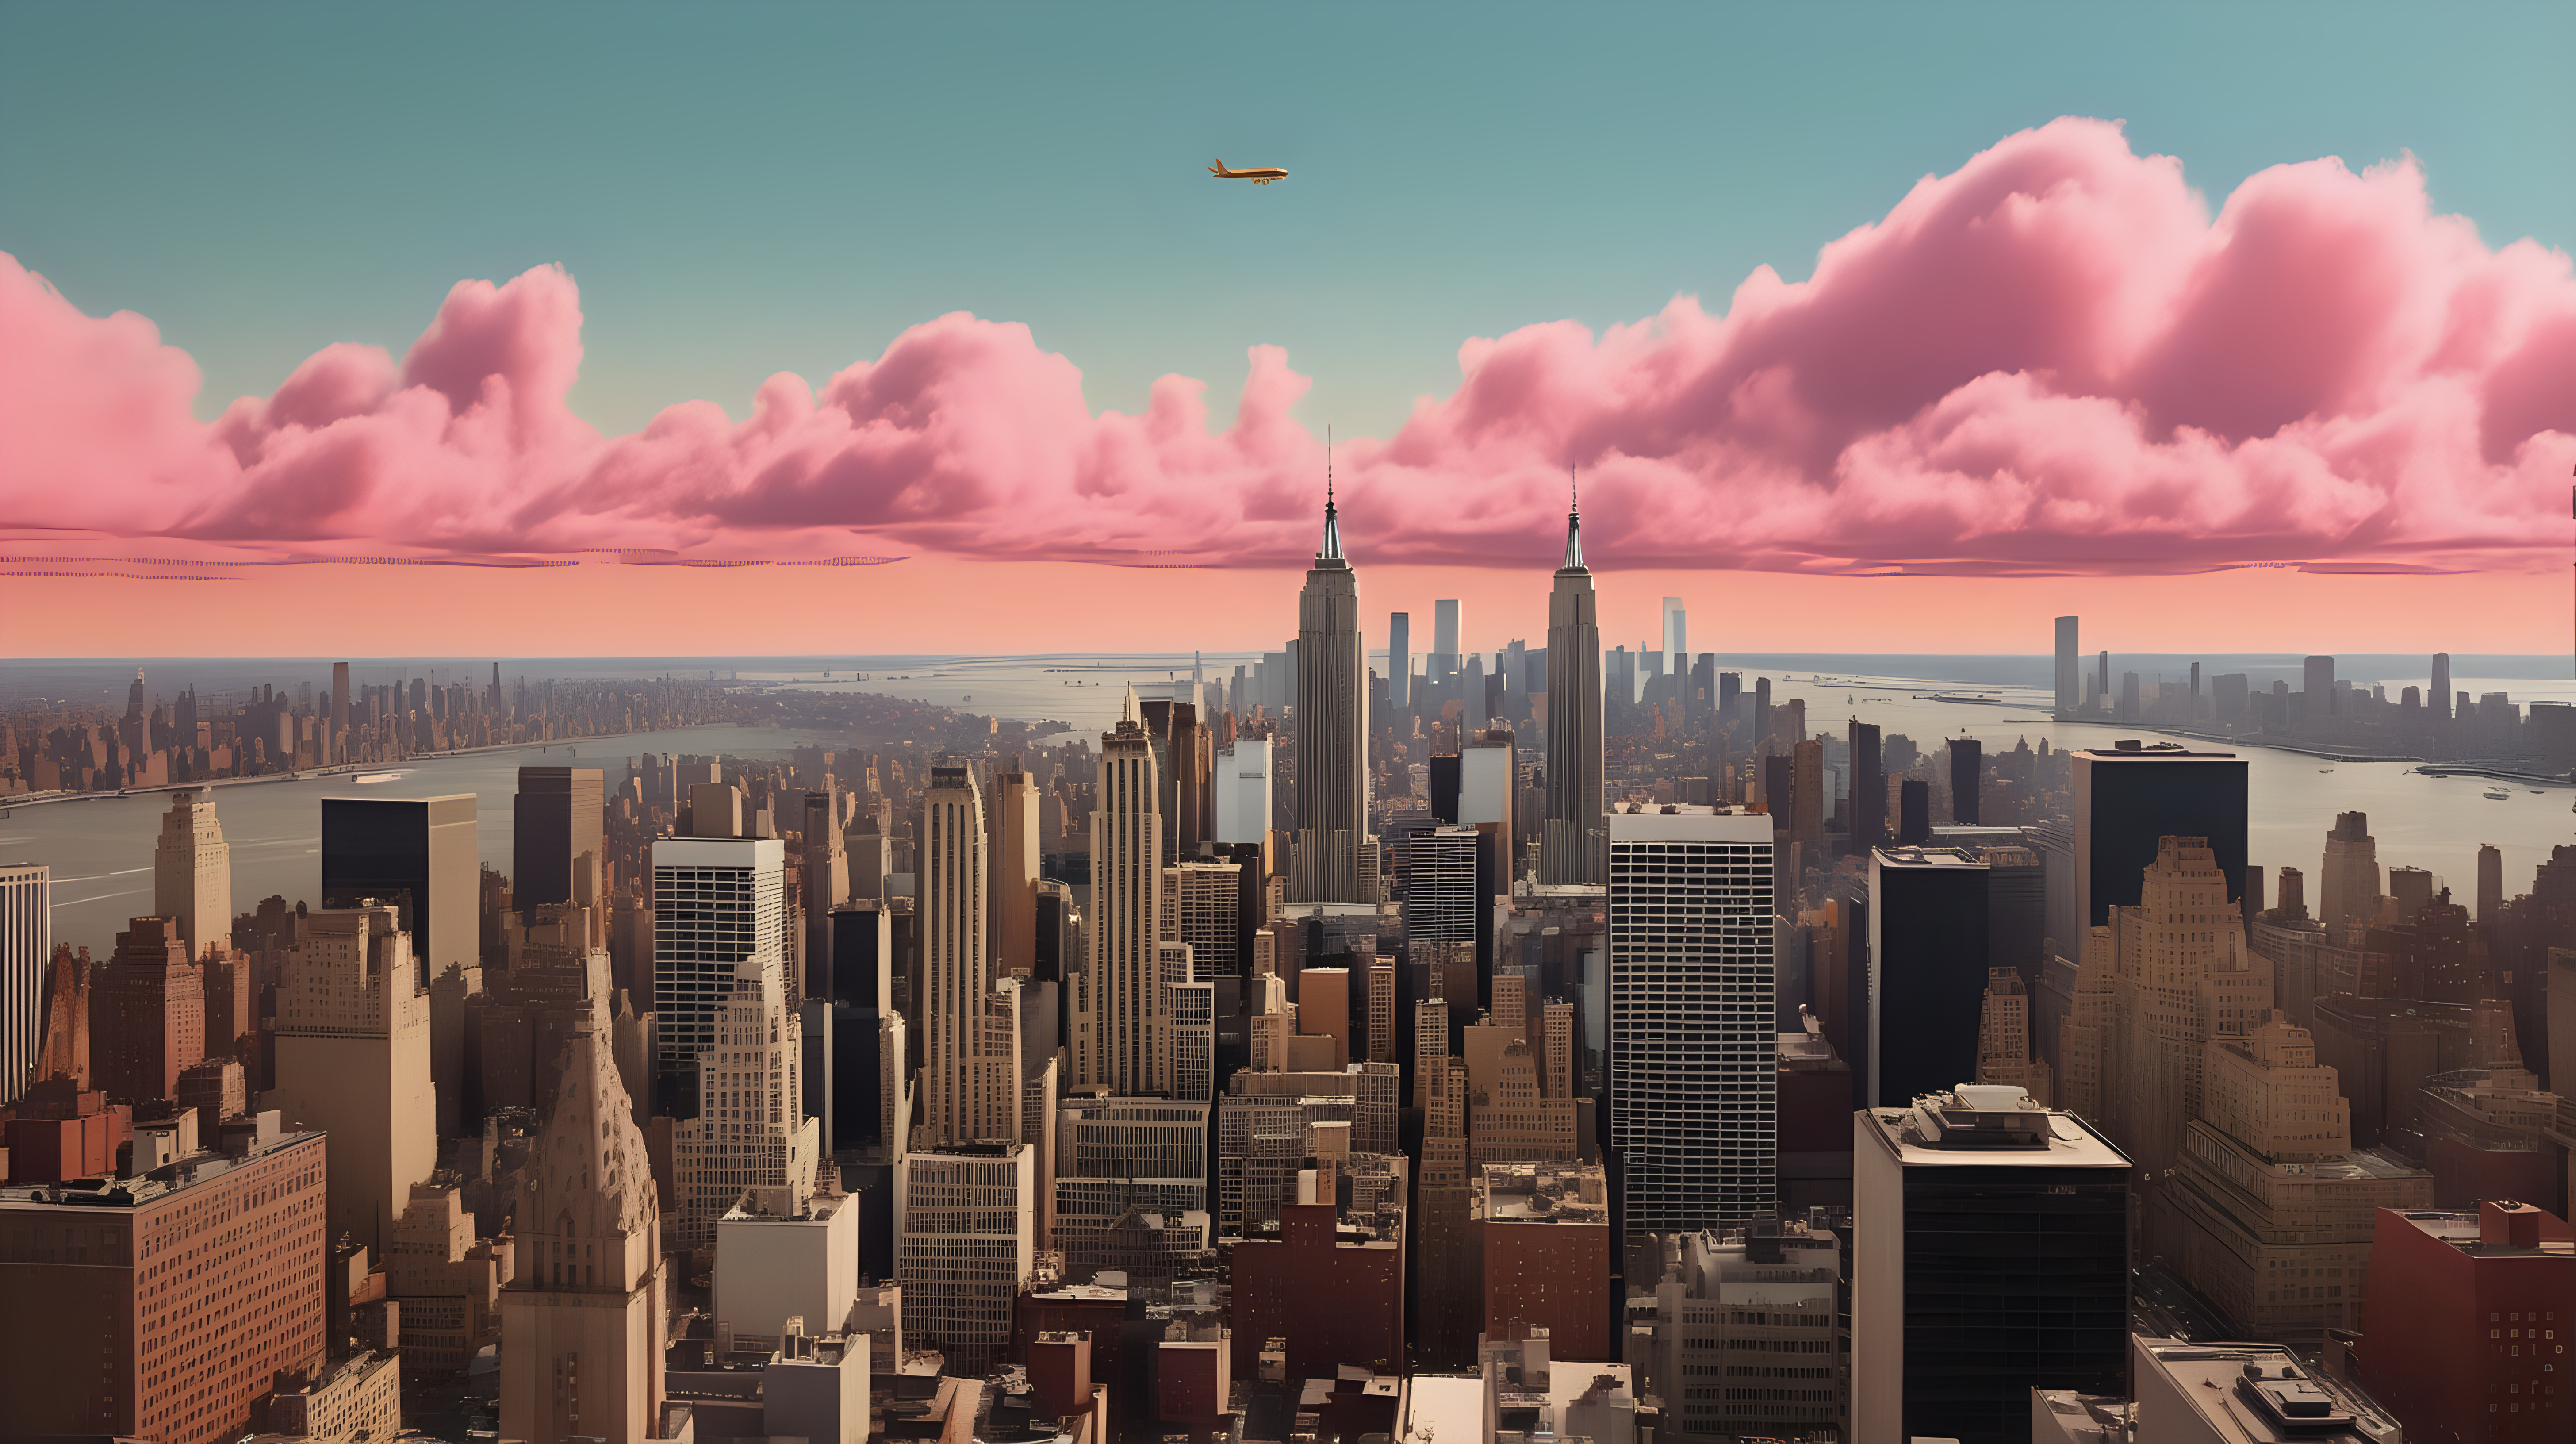 high quality matte painting of the new york city skyline from the perspective of someone in new jersey in the style of a wes anderson movie
